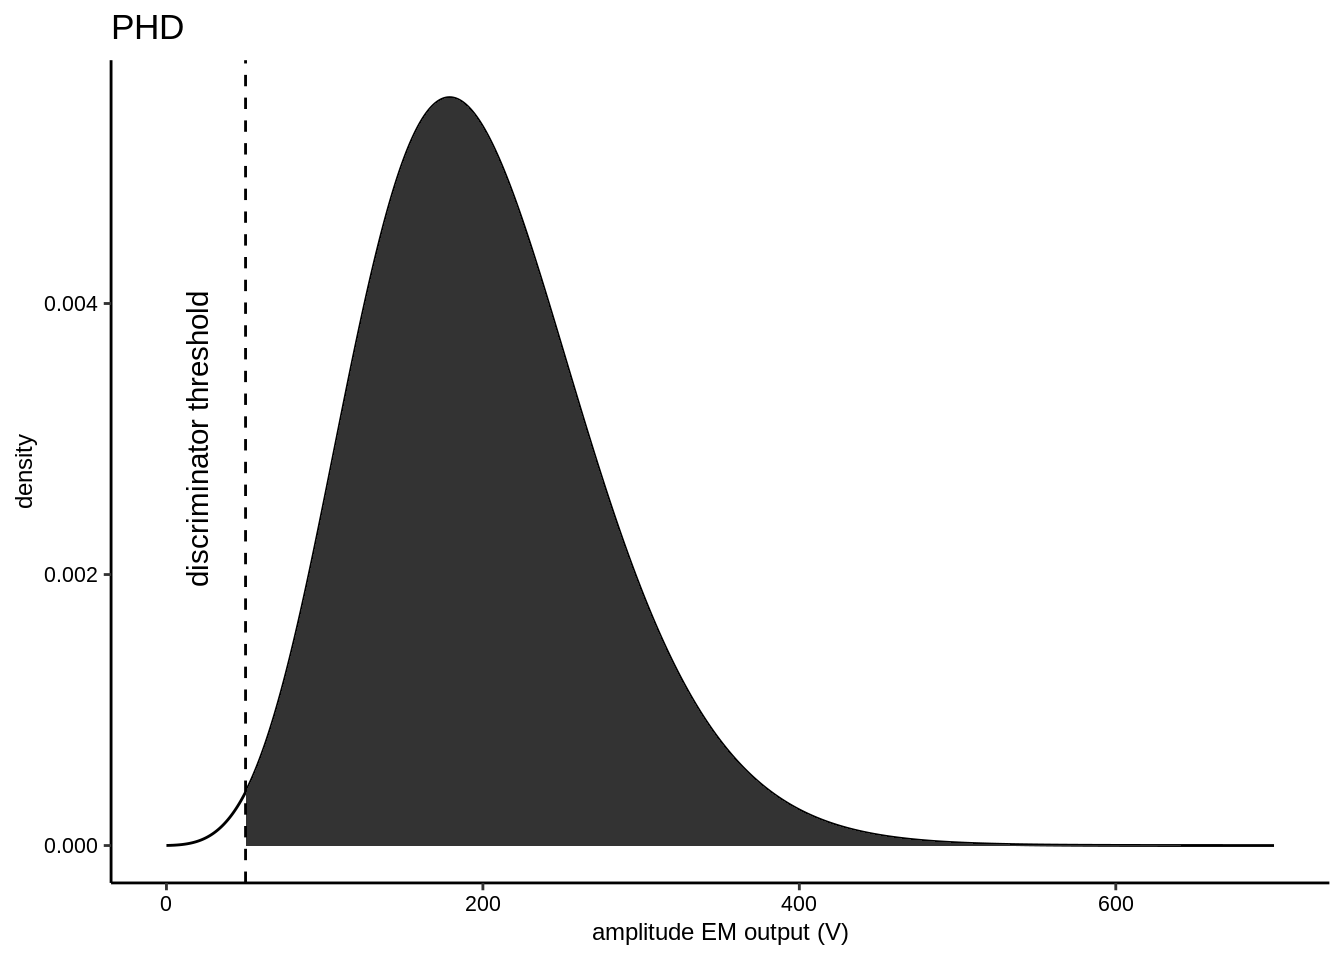 An example of a typical PHD distribution. The effect of the discriminator threshold on the EM Yield is examplified by the shaded area underneath the probability density function, which would pertain to the probability of an EM output to be larger than the threshold